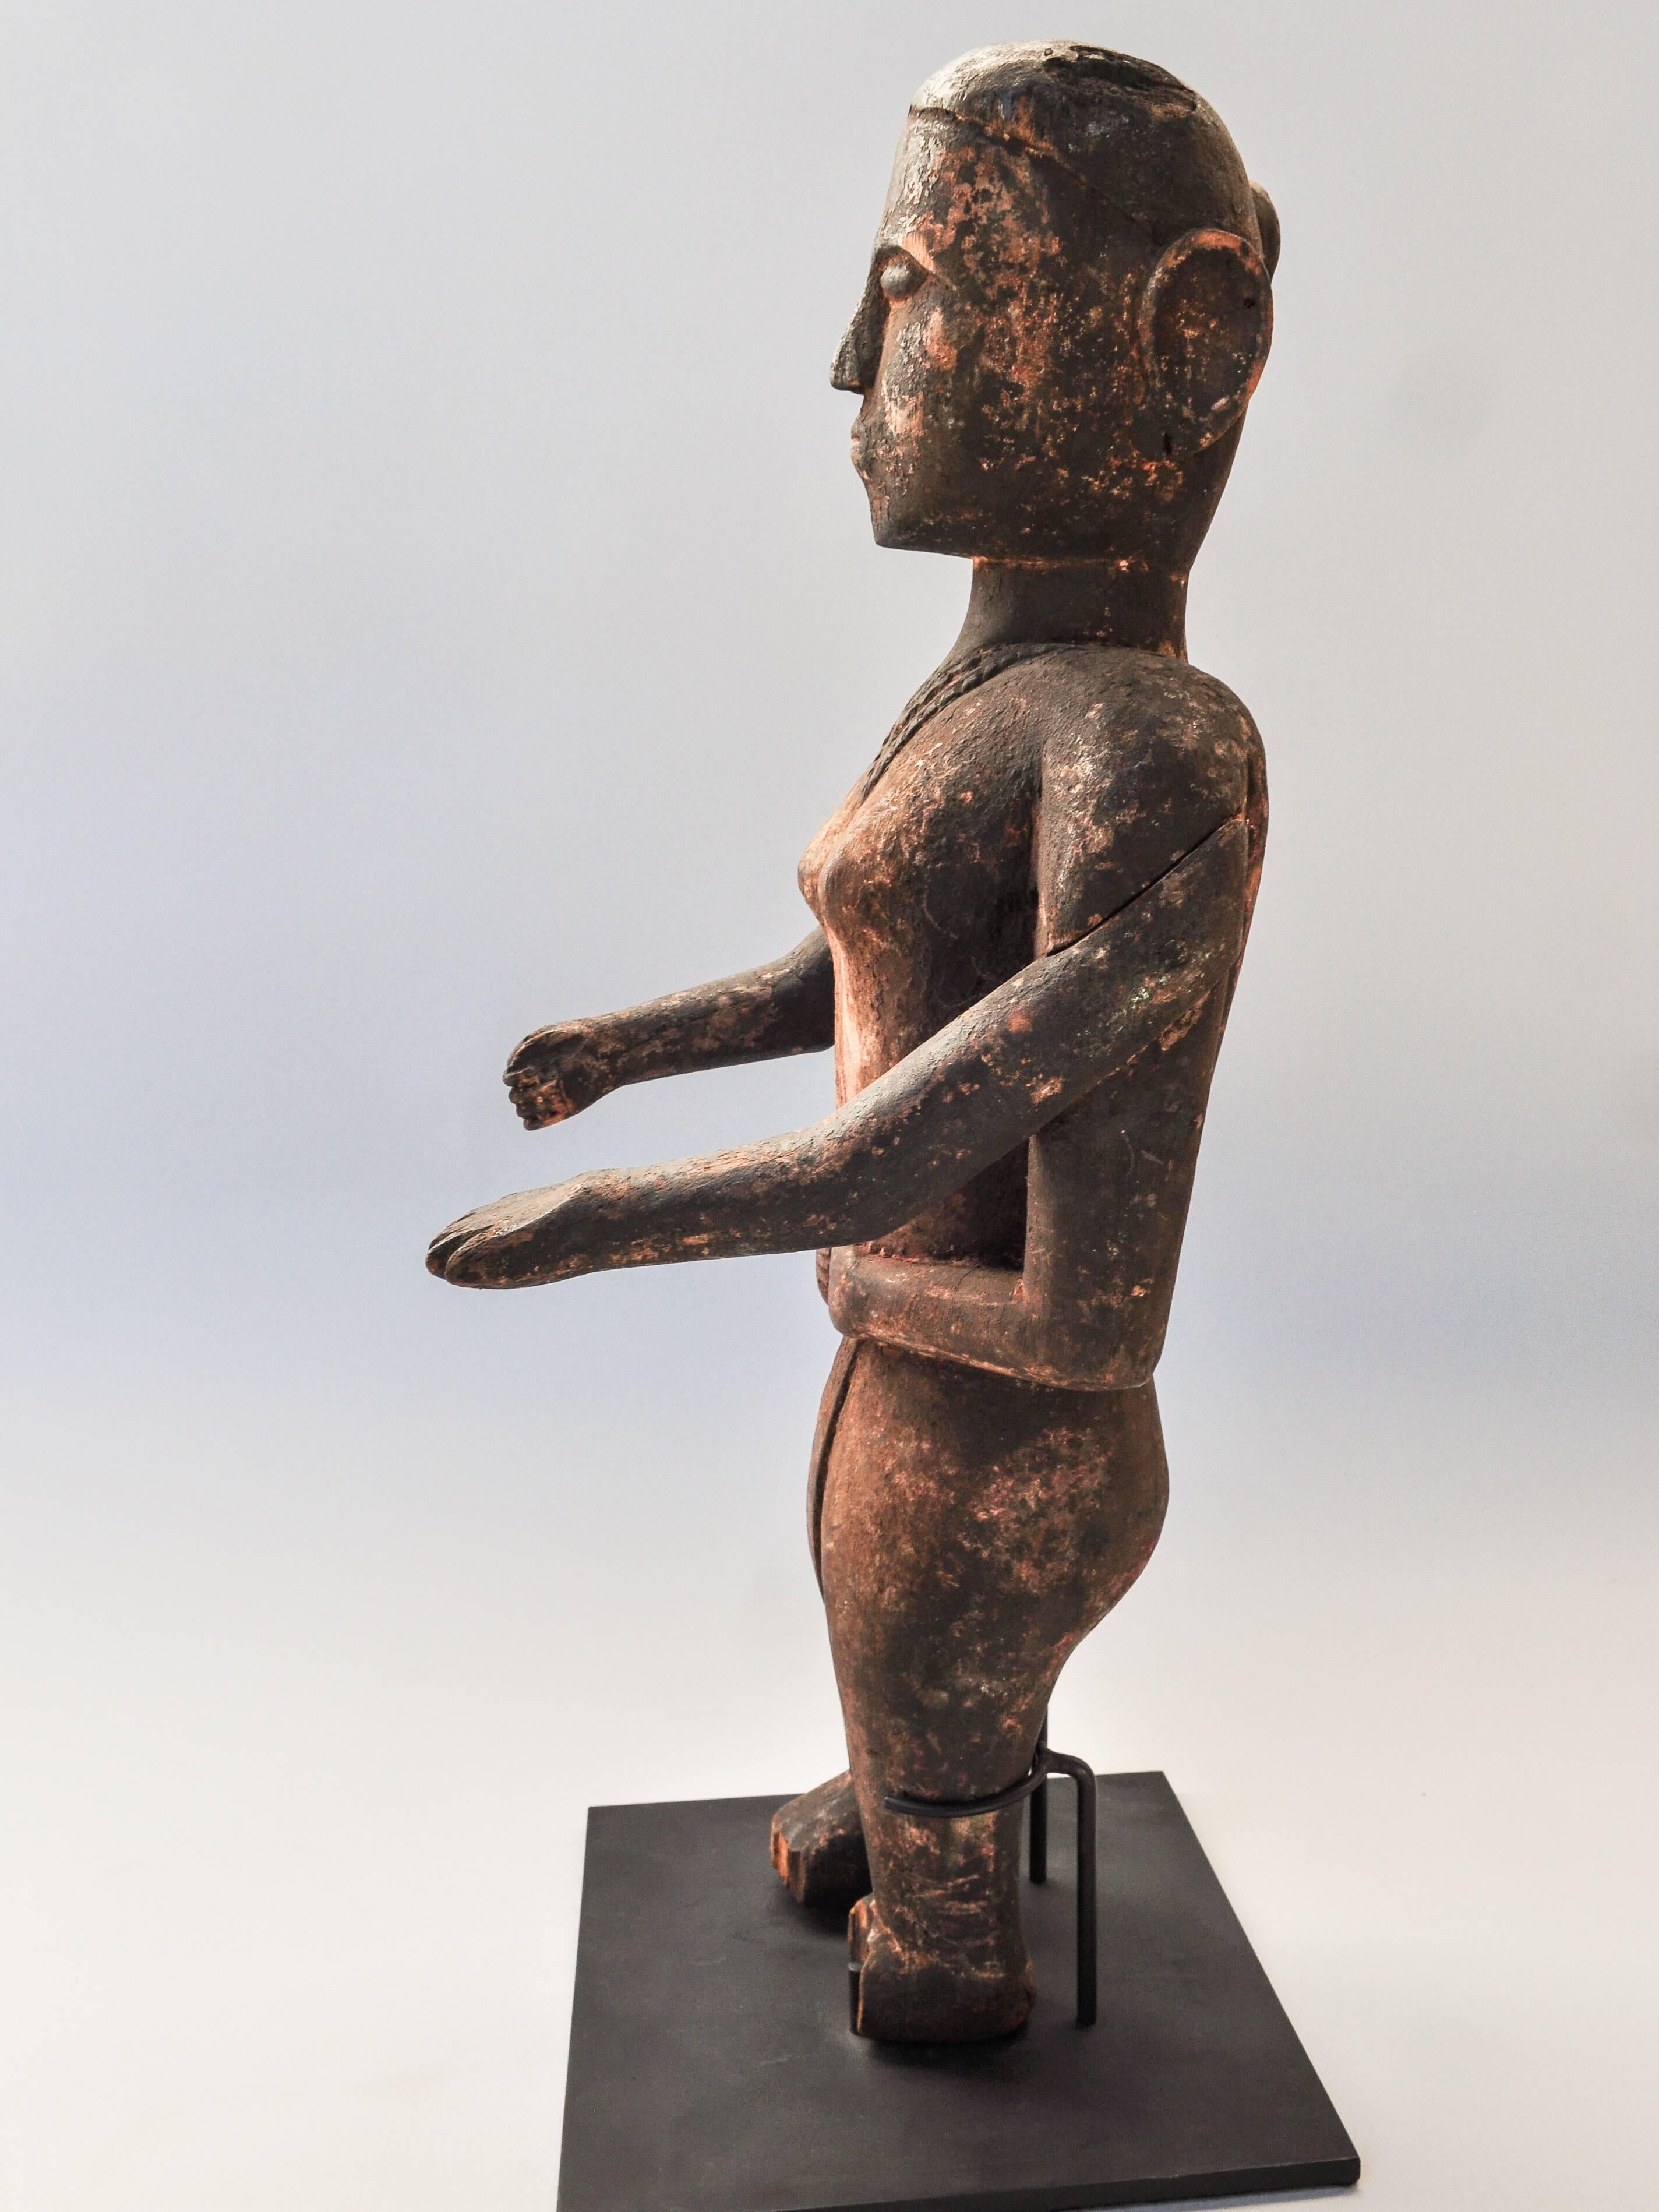 Hand-Carved Wood Carved Statue Tharu People Southern Nepal, Early-Mid 20th Century.